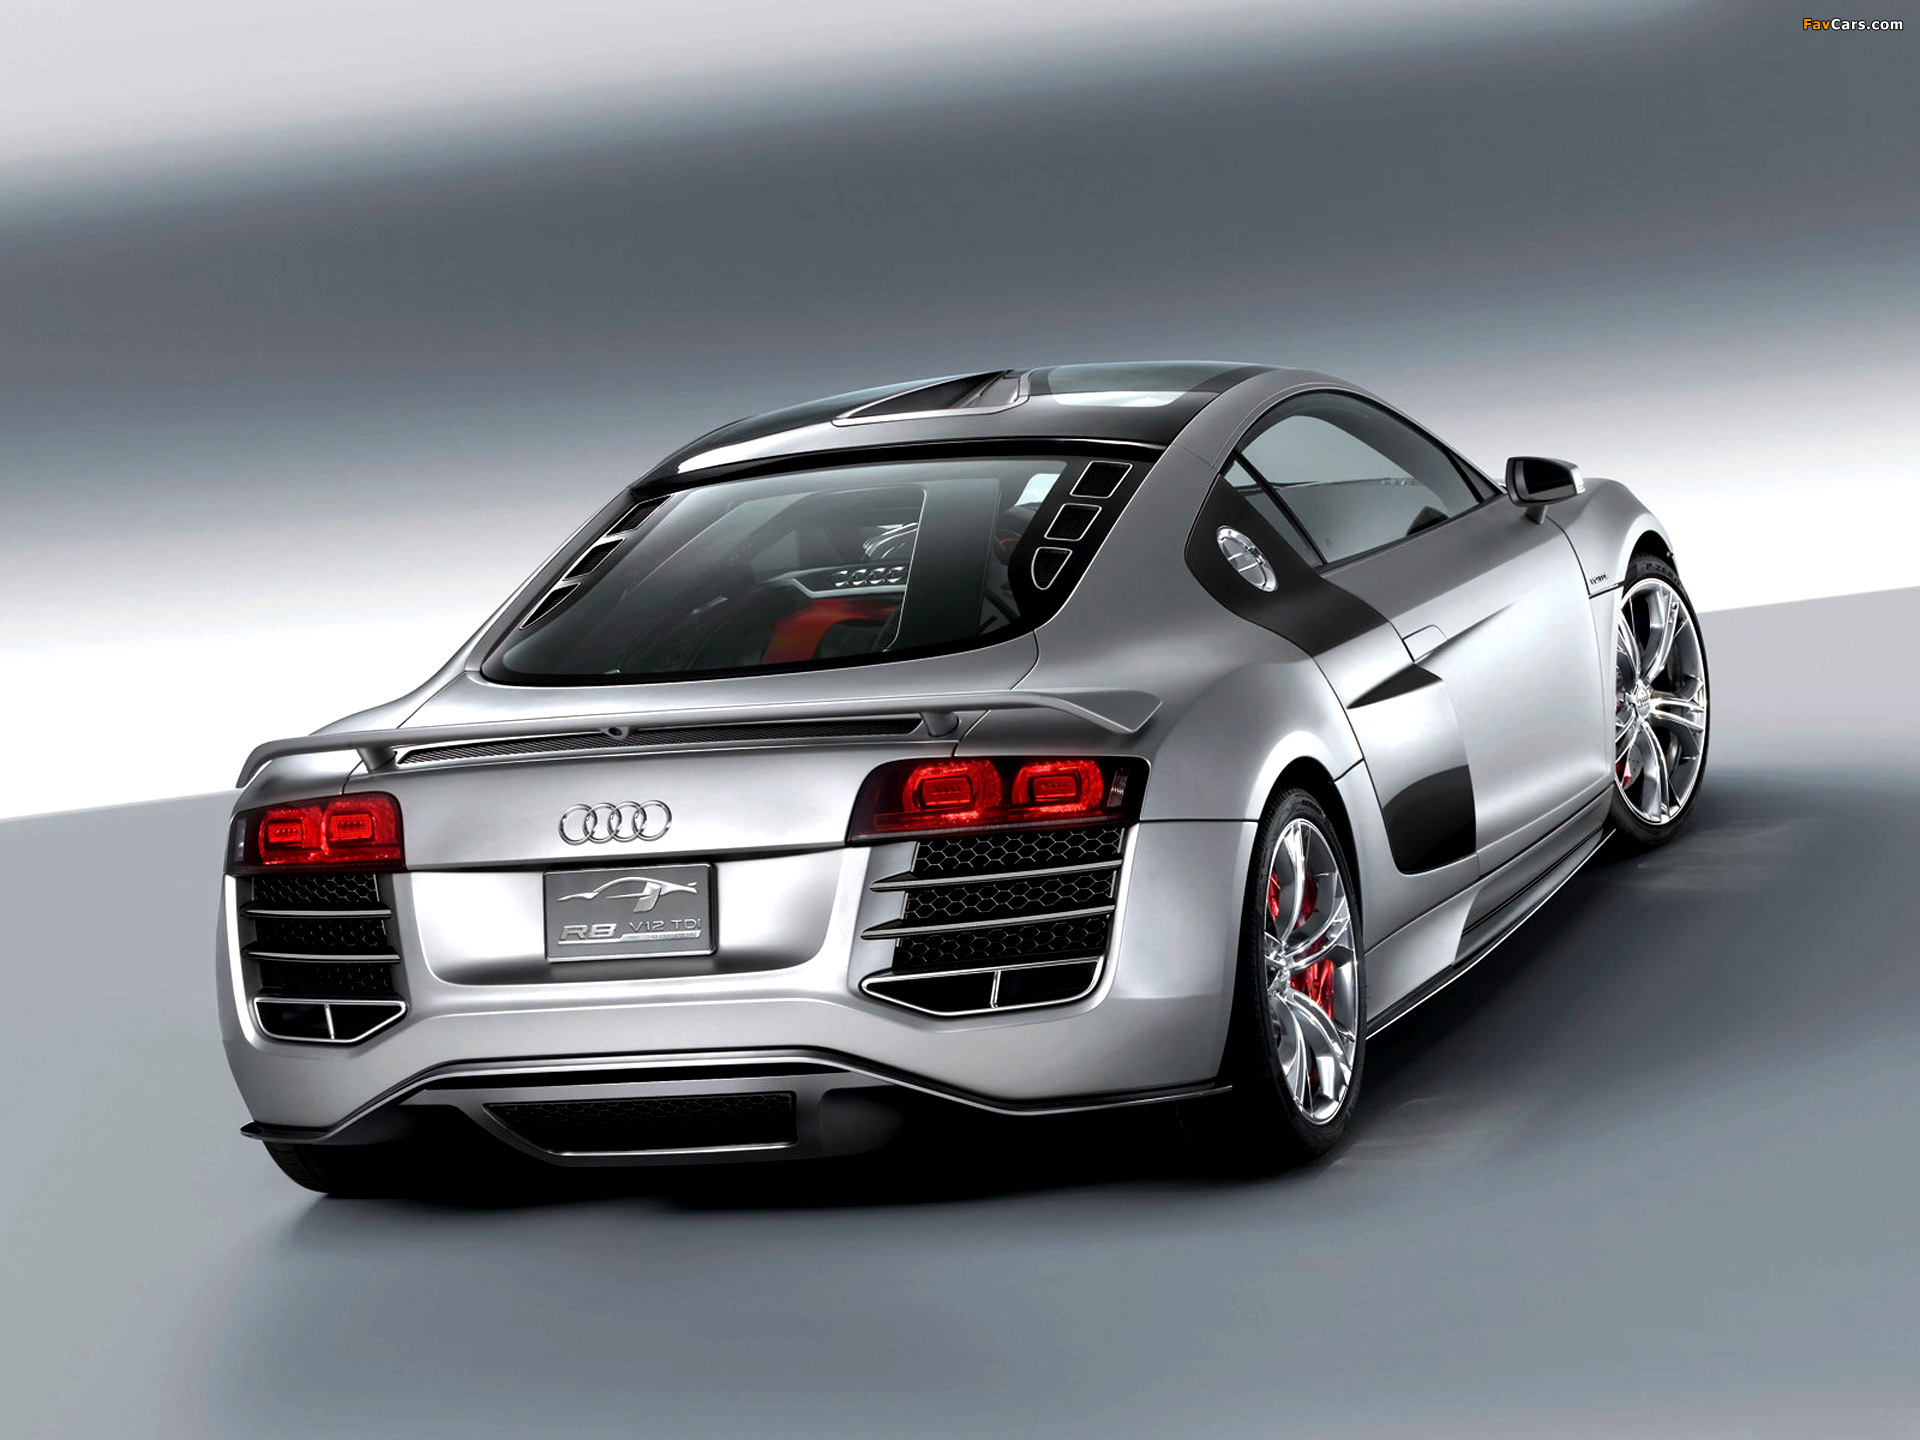 Pictures of Audi R8 V12 TDI Concept 2008 (1920 x 1440)